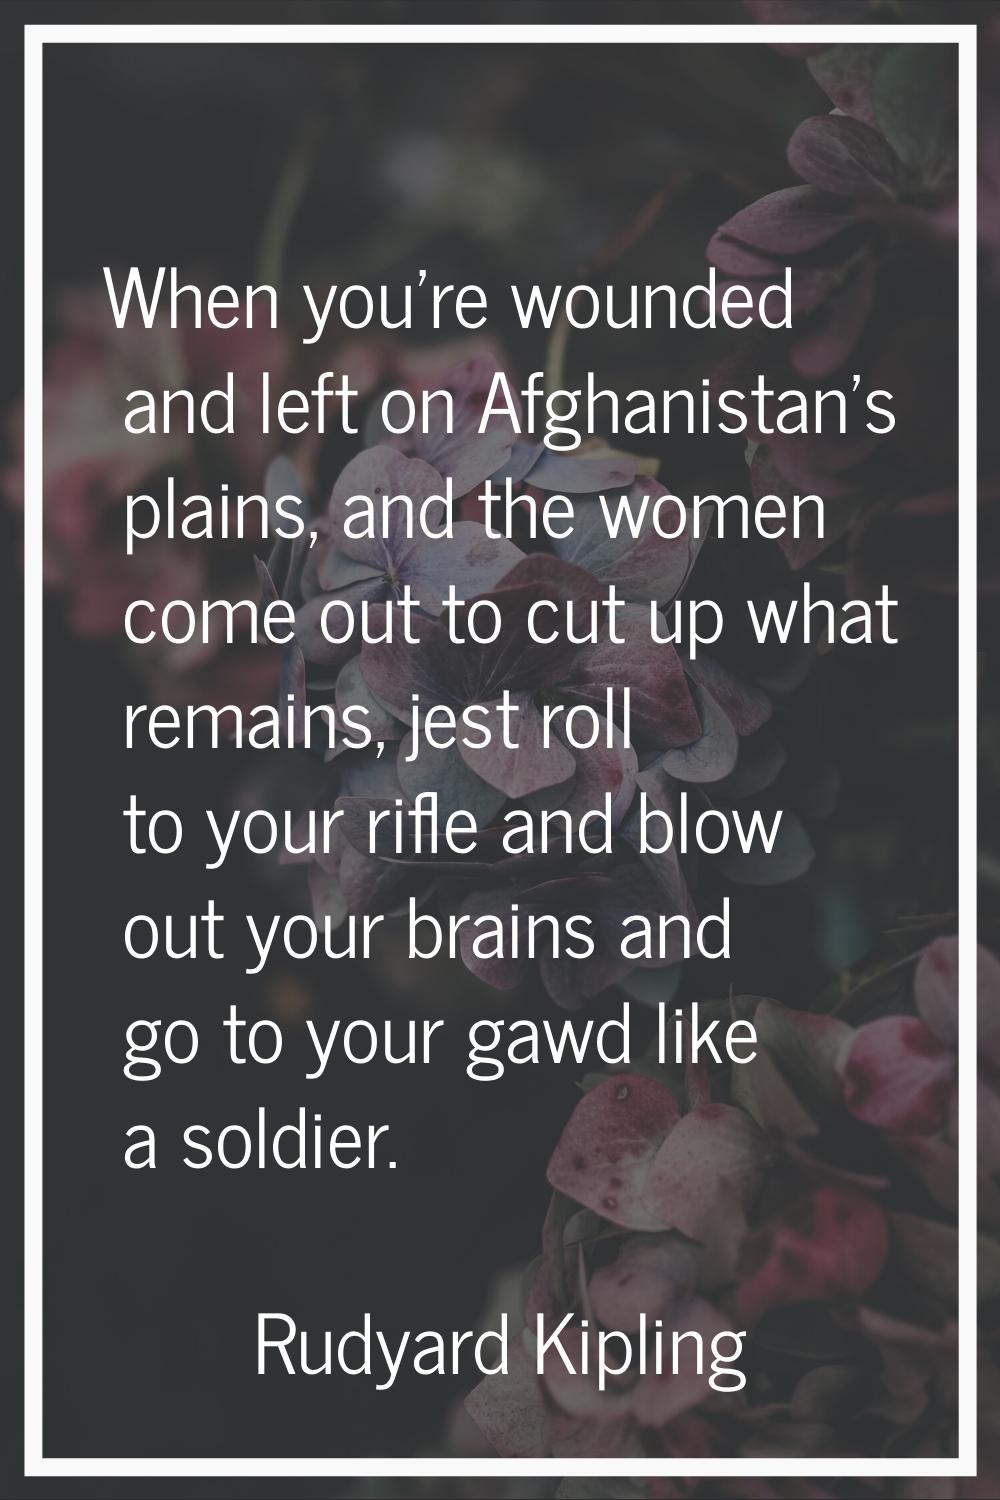 When you're wounded and left on Afghanistan's plains, and the women come out to cut up what remains